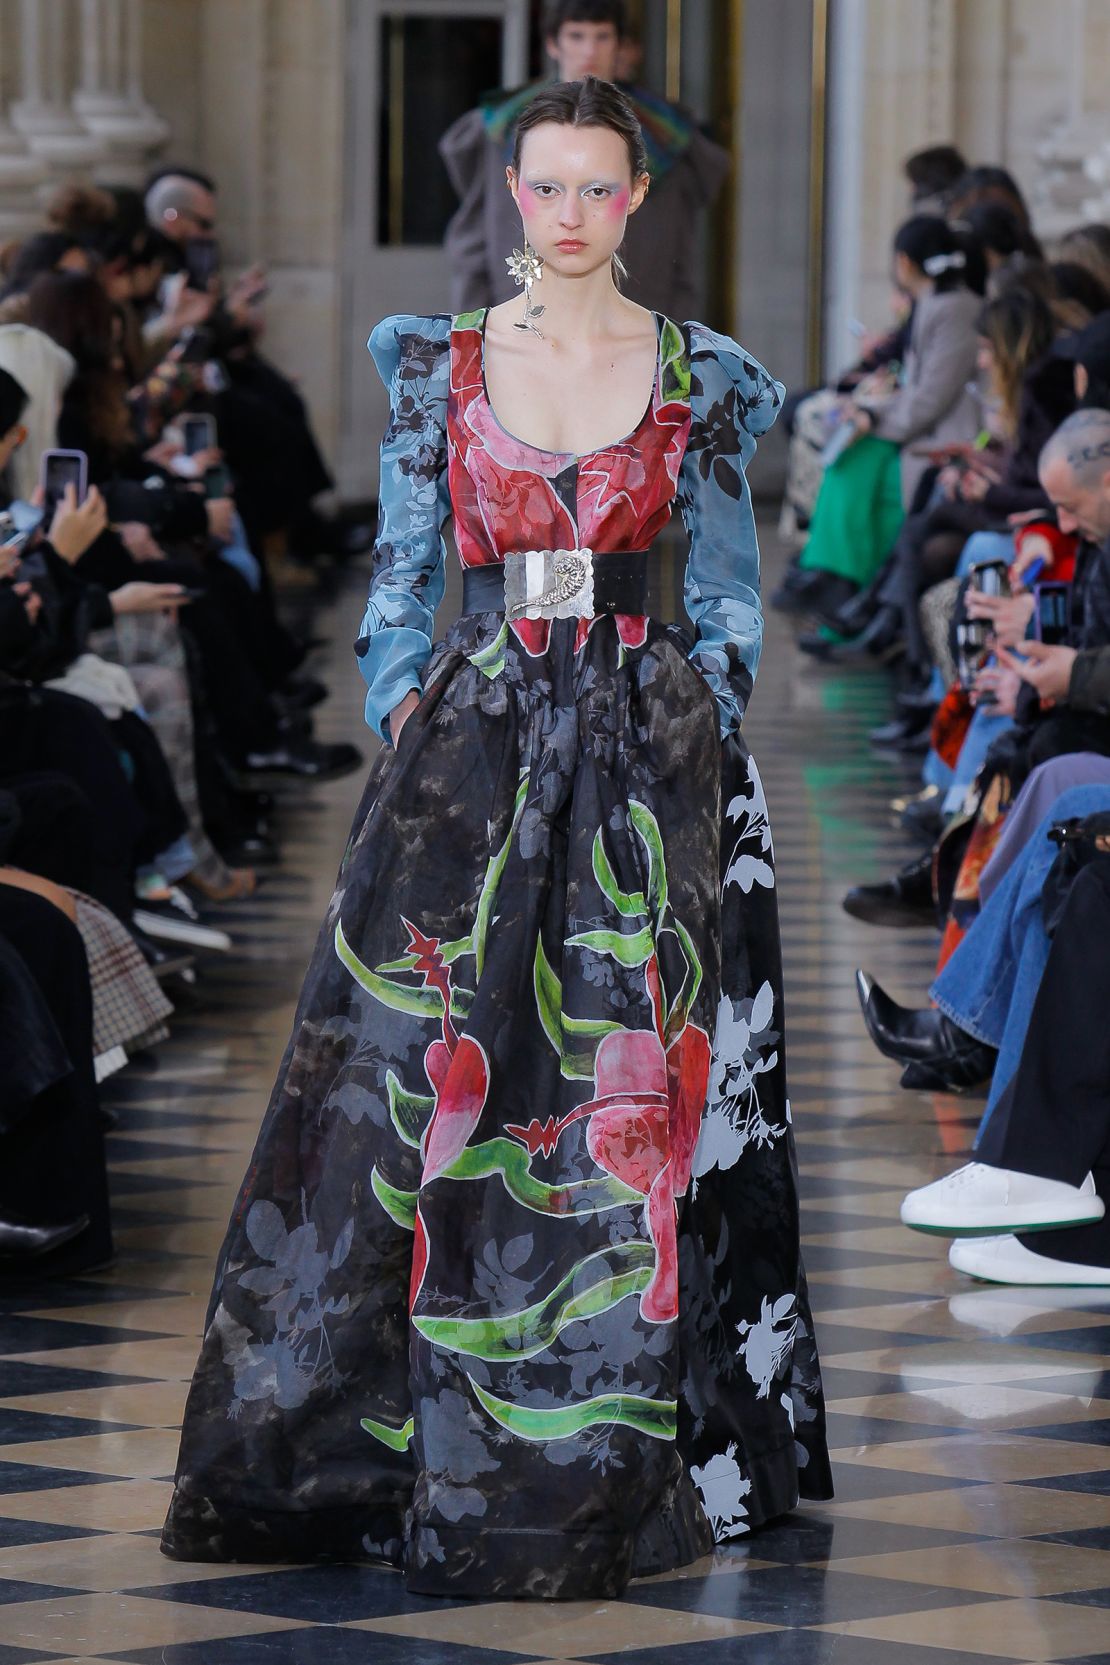 Vivienne Westwood's latest collection, designed by Kronthaler, was dedicated to the designer who died in December 2022.